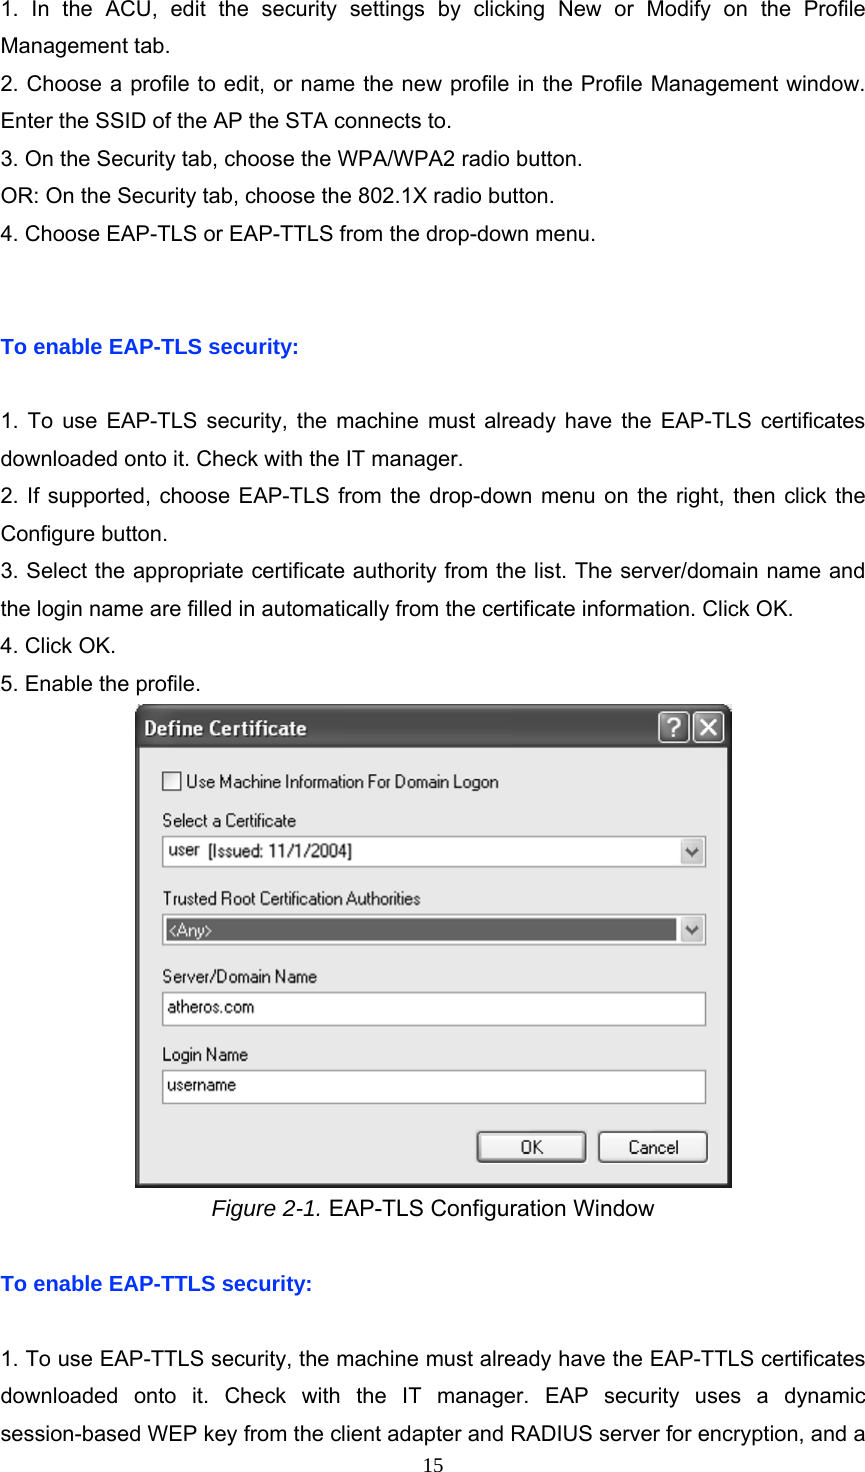  1. In the ACU, edit the security settings by clicking New or Modify on the Profile Management tab. 2. Choose a profile to edit, or name the new profile in the Profile Management window. Enter the SSID of the AP the STA connects to. 3. On the Security tab, choose the WPA/WPA2 radio button. OR: On the Security tab, choose the 802.1X radio button. 4. Choose EAP-TLS or EAP-TTLS from the drop-down menu.   To enable EAP-TLS security:  1. To use EAP-TLS security, the machine must already have the EAP-TLS certificates downloaded onto it. Check with the IT manager. 2. If supported, choose EAP-TLS from the drop-down menu on the right, then click the Configure button. 3. Select the appropriate certificate authority from the list. The server/domain name and the login name are filled in automatically from the certificate information. Click OK. 4. Click OK. 5. Enable the profile.  Figure 2-1. EAP-TLS Configuration Window  To enable EAP-TTLS security:  1. To use EAP-TTLS security, the machine must already have the EAP-TTLS certificates downloaded onto it. Check with the IT manager. EAP security uses a dynamic session-based WEP key from the client adapter and RADIUS server for encryption, and a  15